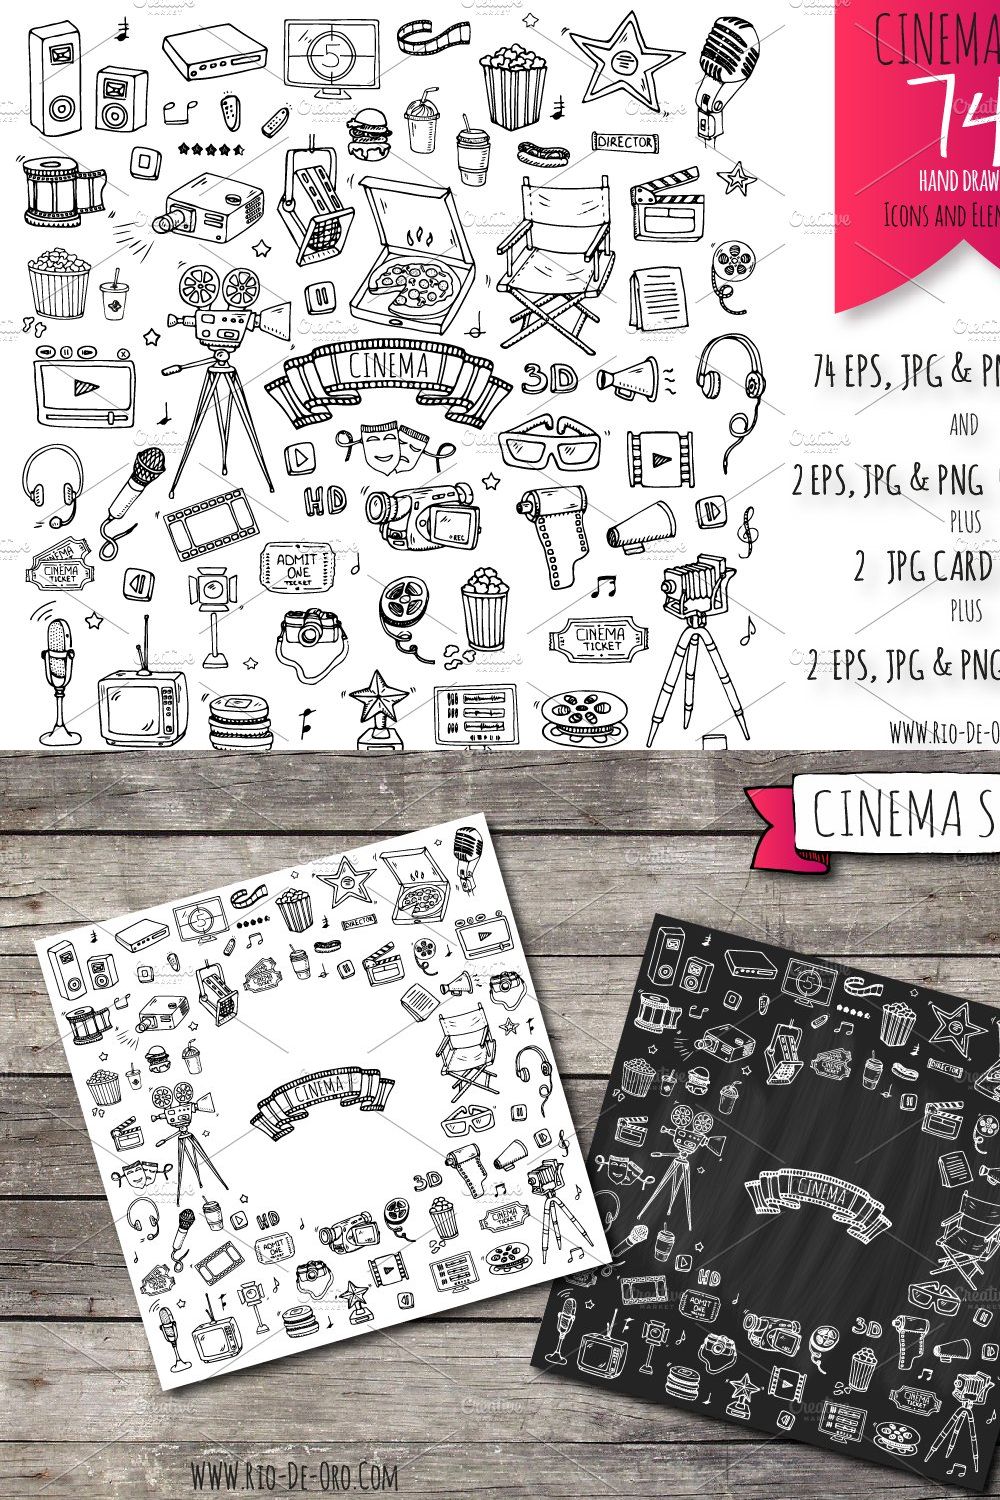 74 Cinema hand drawn elements pinterest preview image.